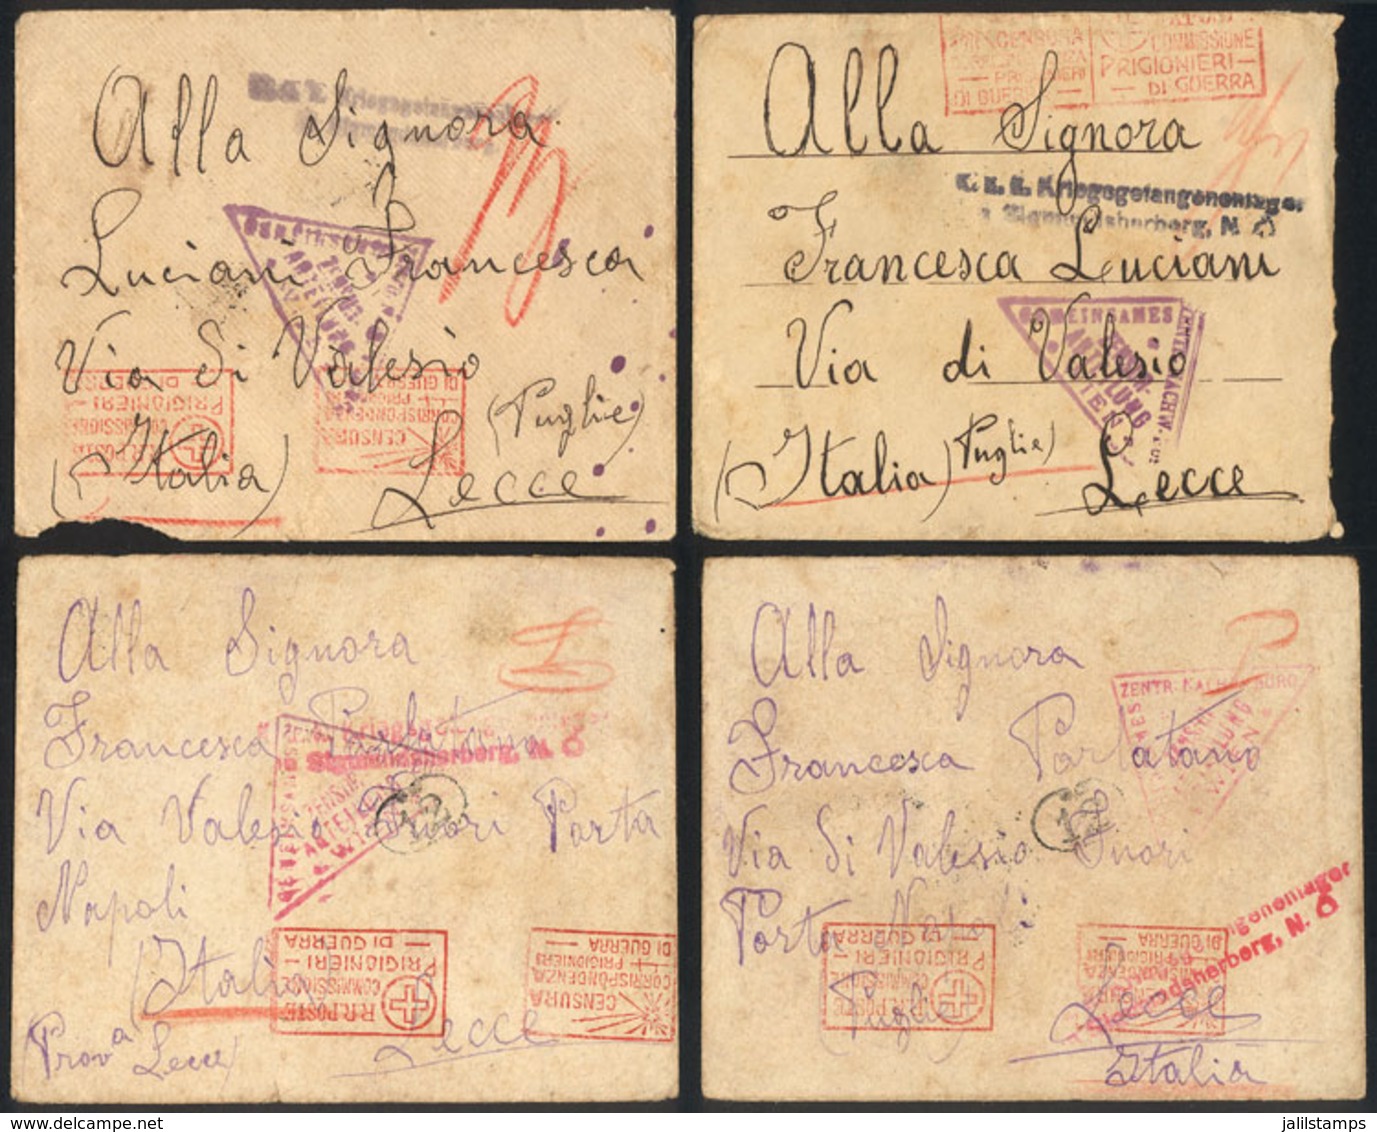 ITALY: PRISONERS OF WAR MAIL: 11 Covers (1 Or 2 With Their Original Letters) Sent By Italian Prisoners Of War In Austria - Unclassified